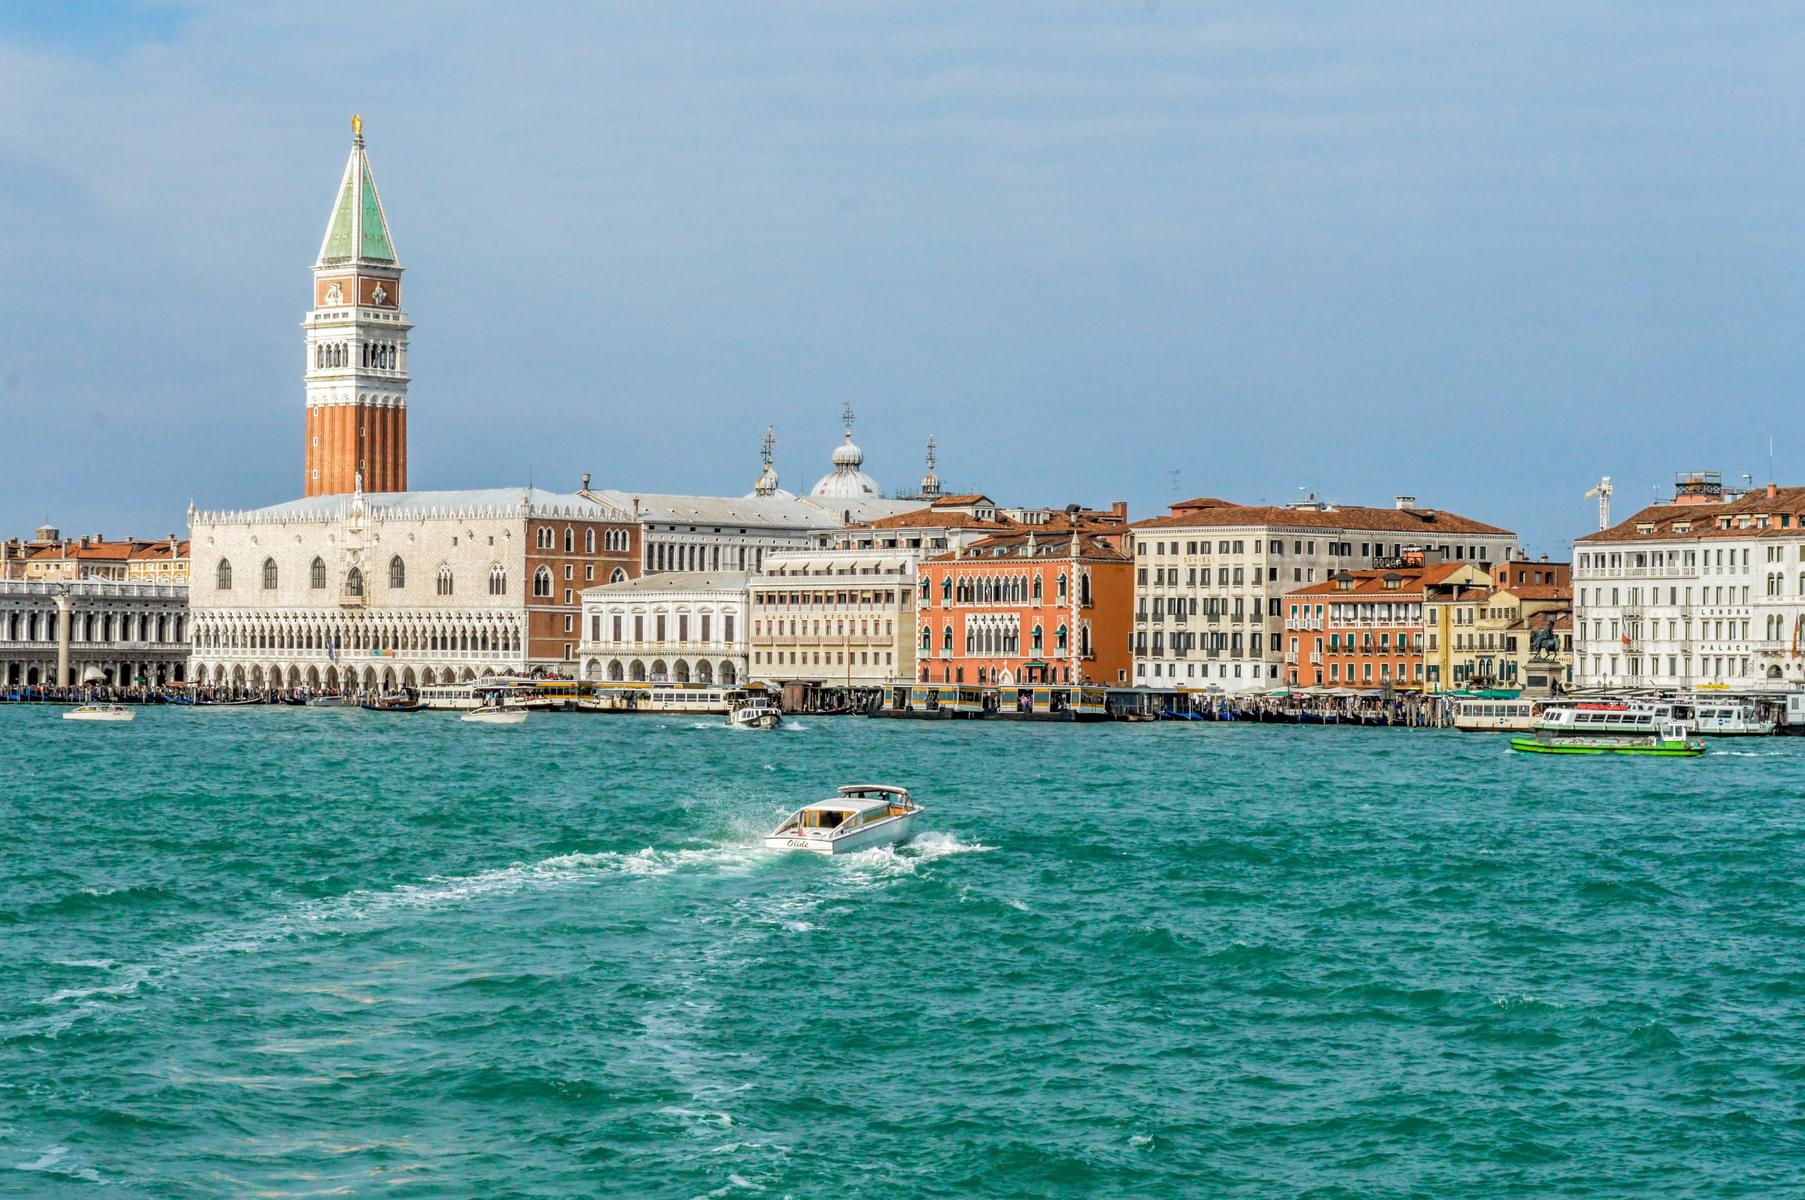 Why Visit the Doge’s Palace?